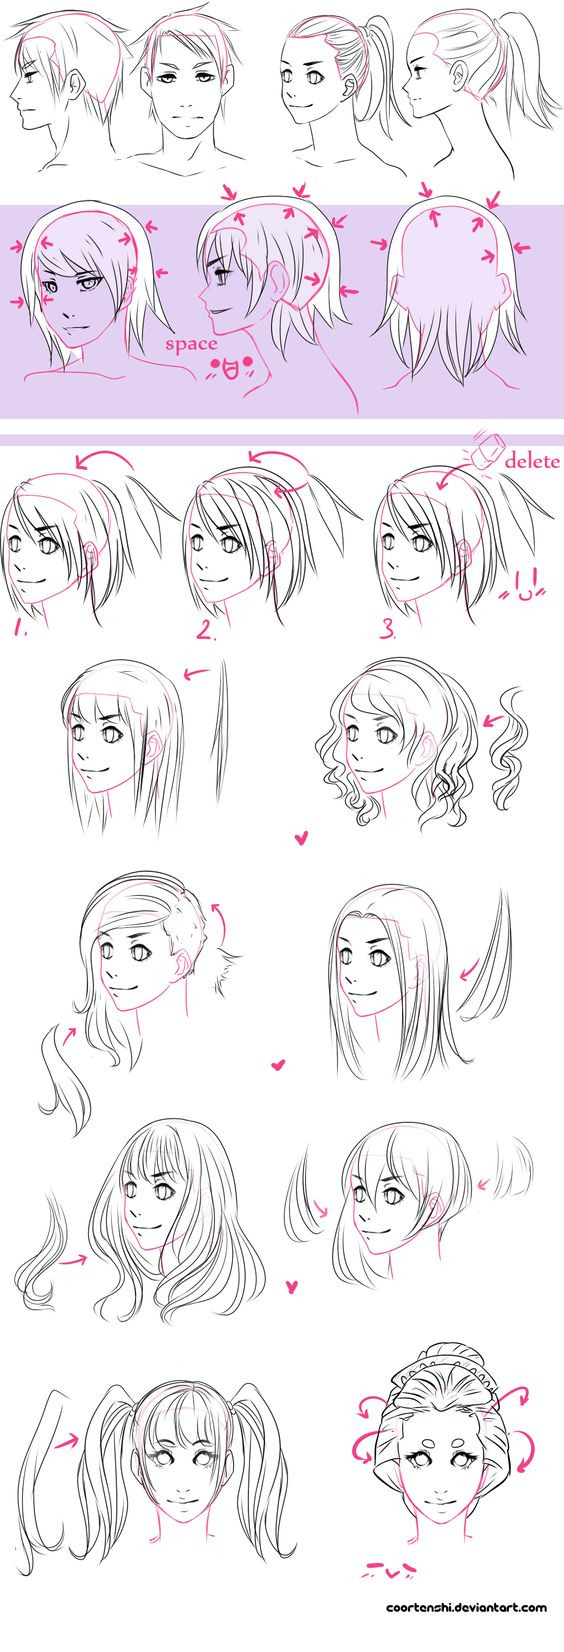 Anime Hairstyles Tutorial
 A hair tutorial by CoorTenshiviantart on